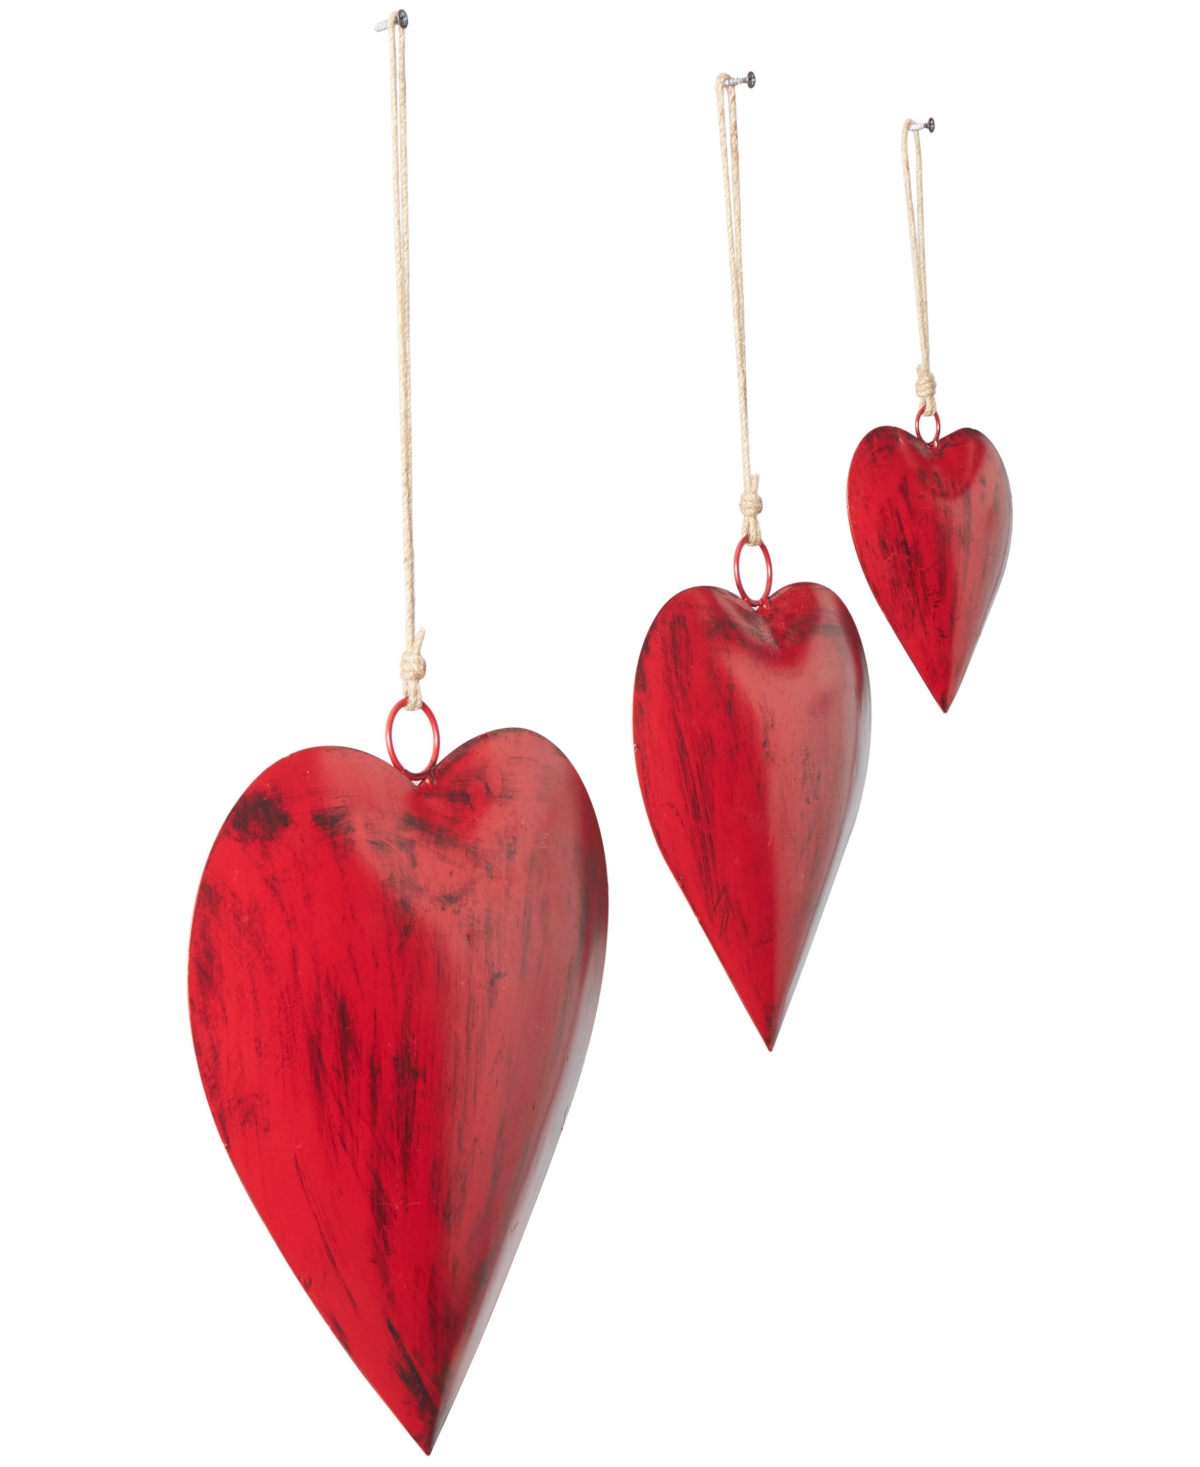 Rosemary Lane Metal Heart Tibetan Inspired Decorative Bell With Hanging Rope, Set Of 3 12", 10", 7"h In Red